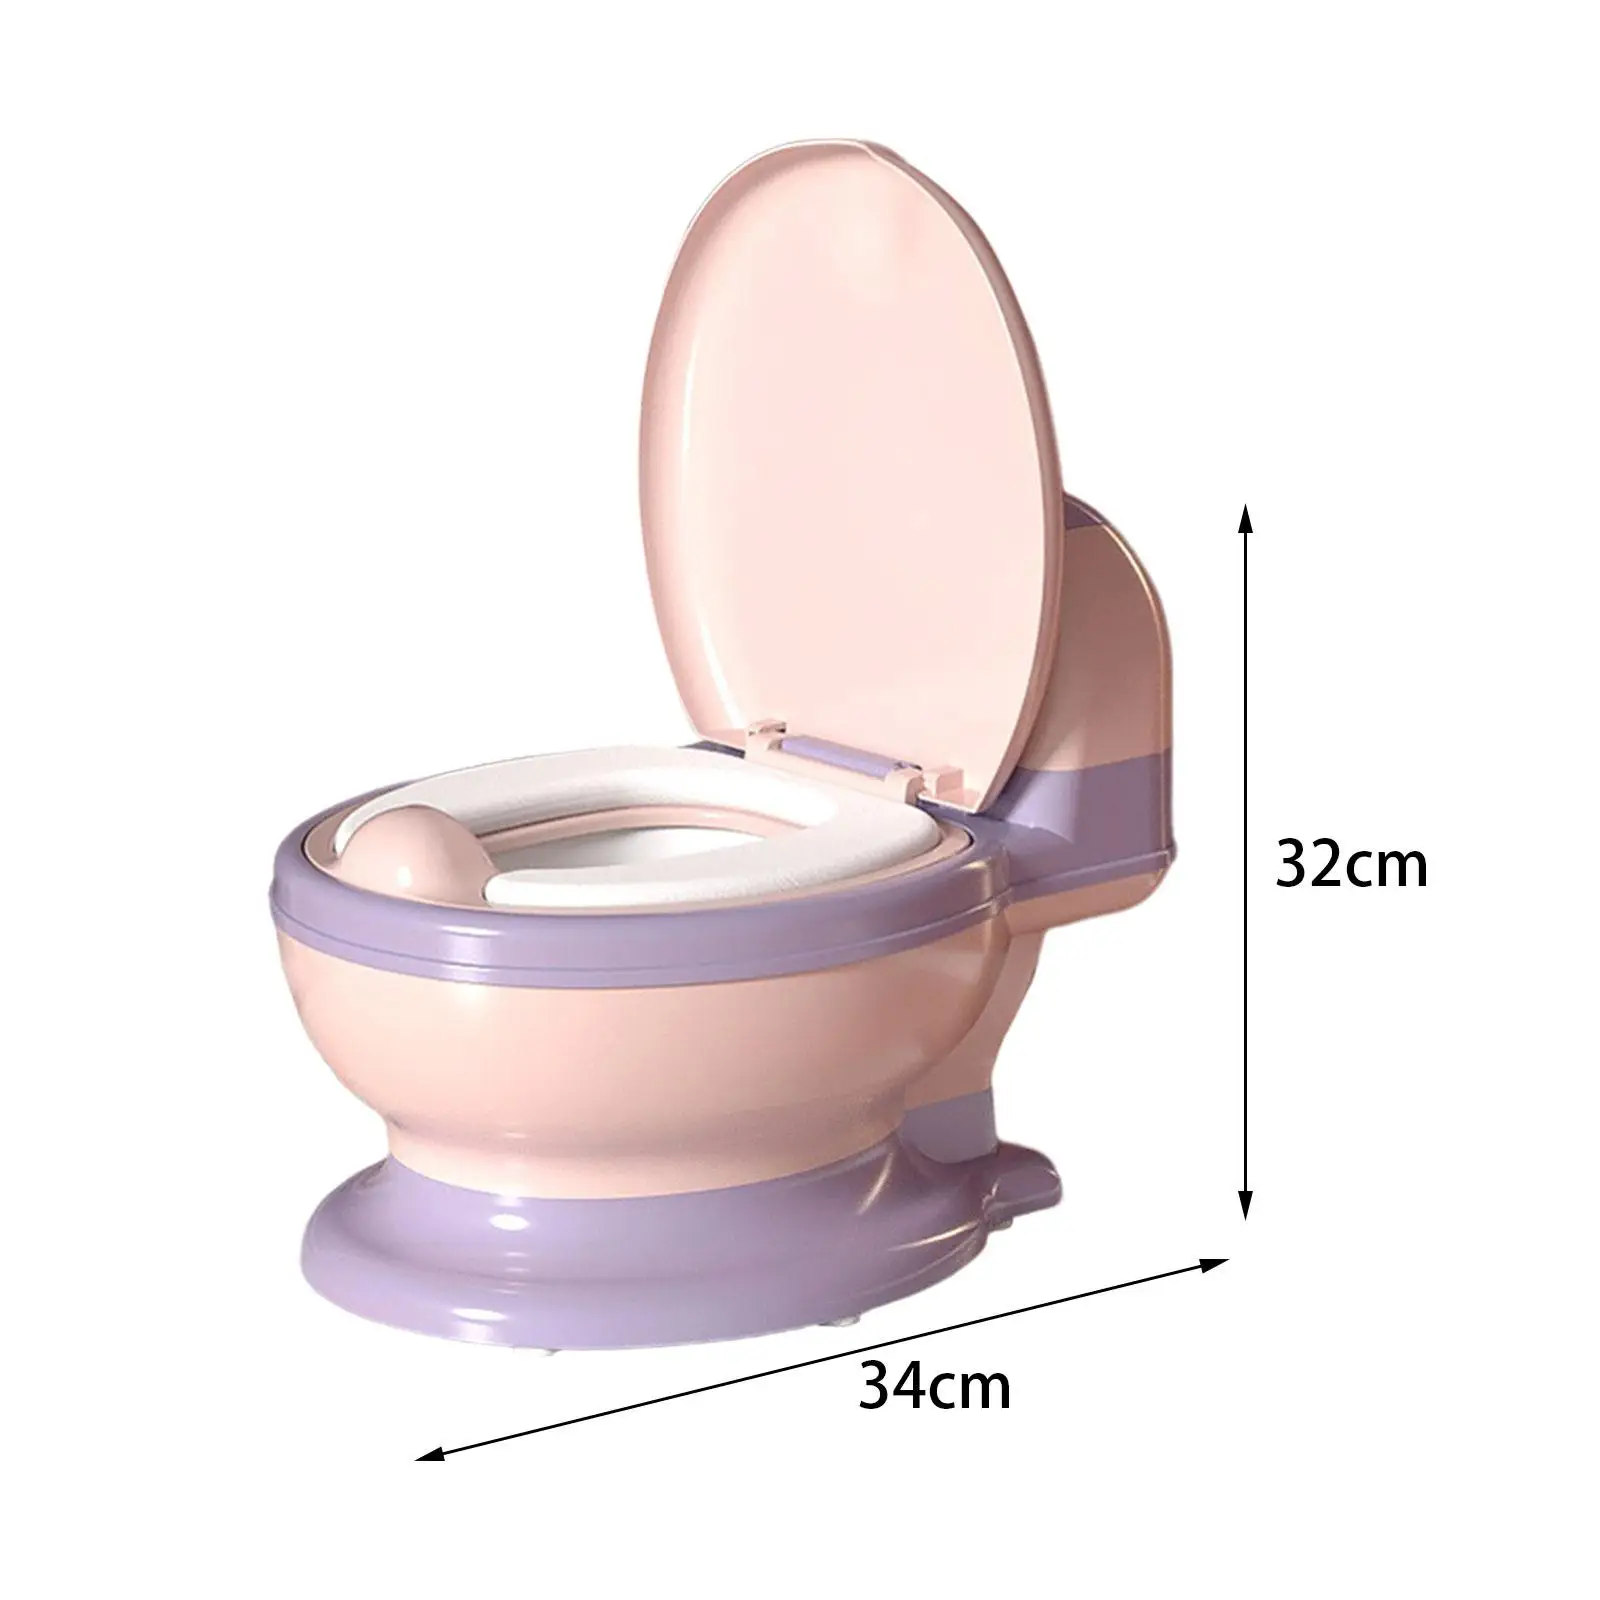 Toilet Training Potty Non Slip Easy to Clean Compact Size (Brush Included) Kids